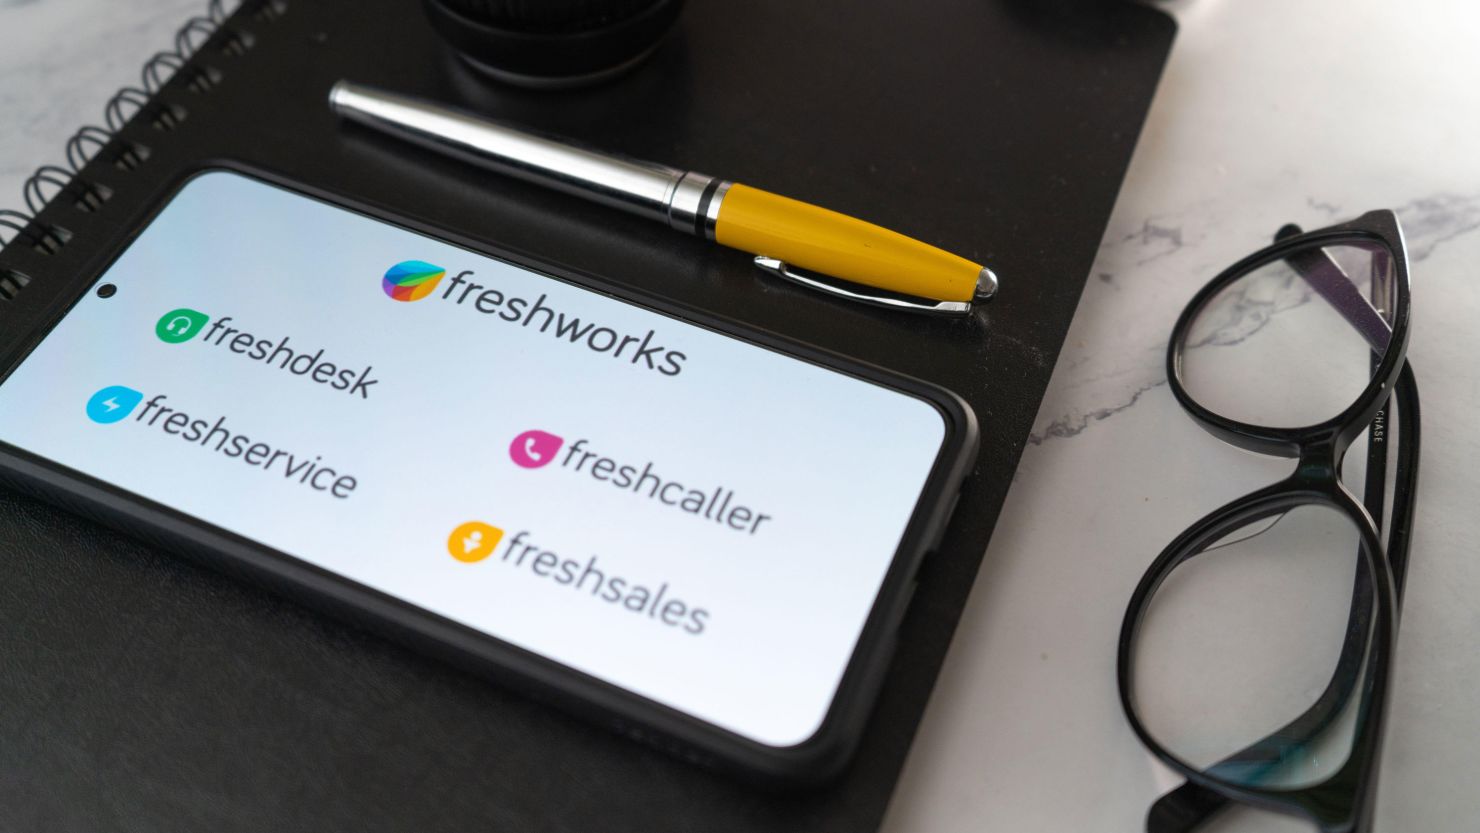 The Freshworks logo on a mobile phone. The Indian company is raising a little over $1 billion in its IPO in New York.